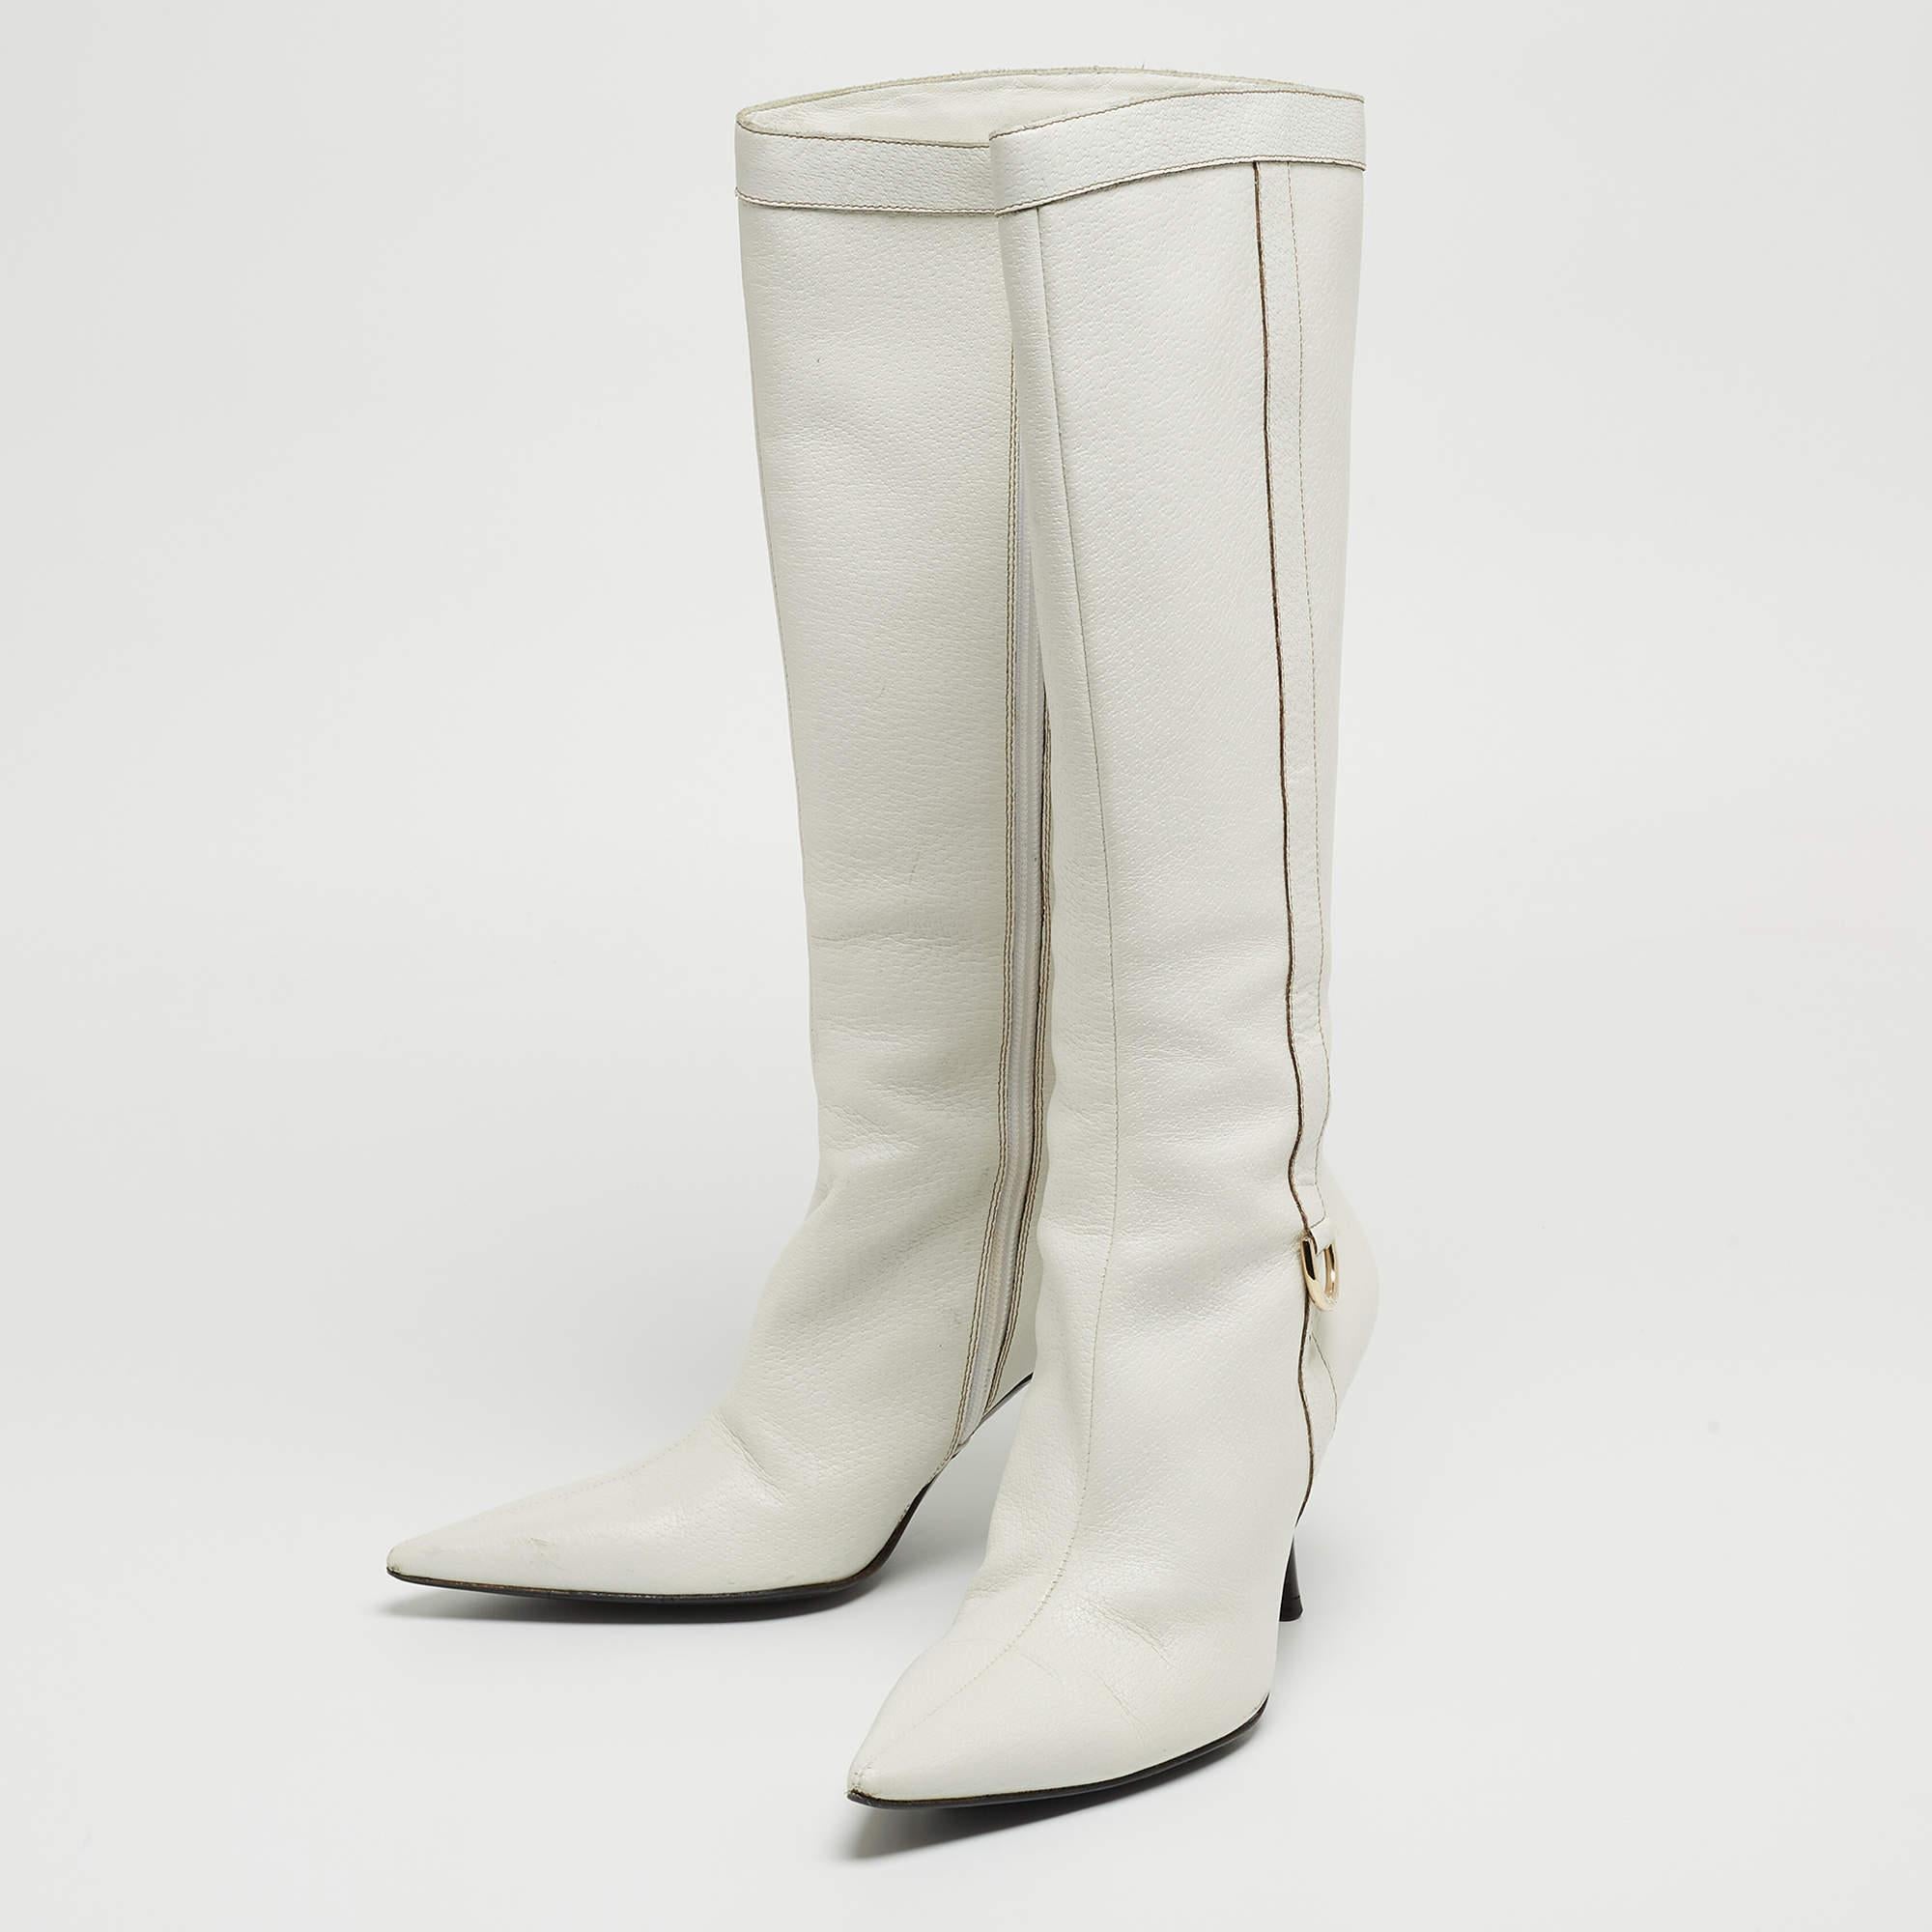 Gucci White Leather Pointed Toe Knee Length Boots Size 41 2